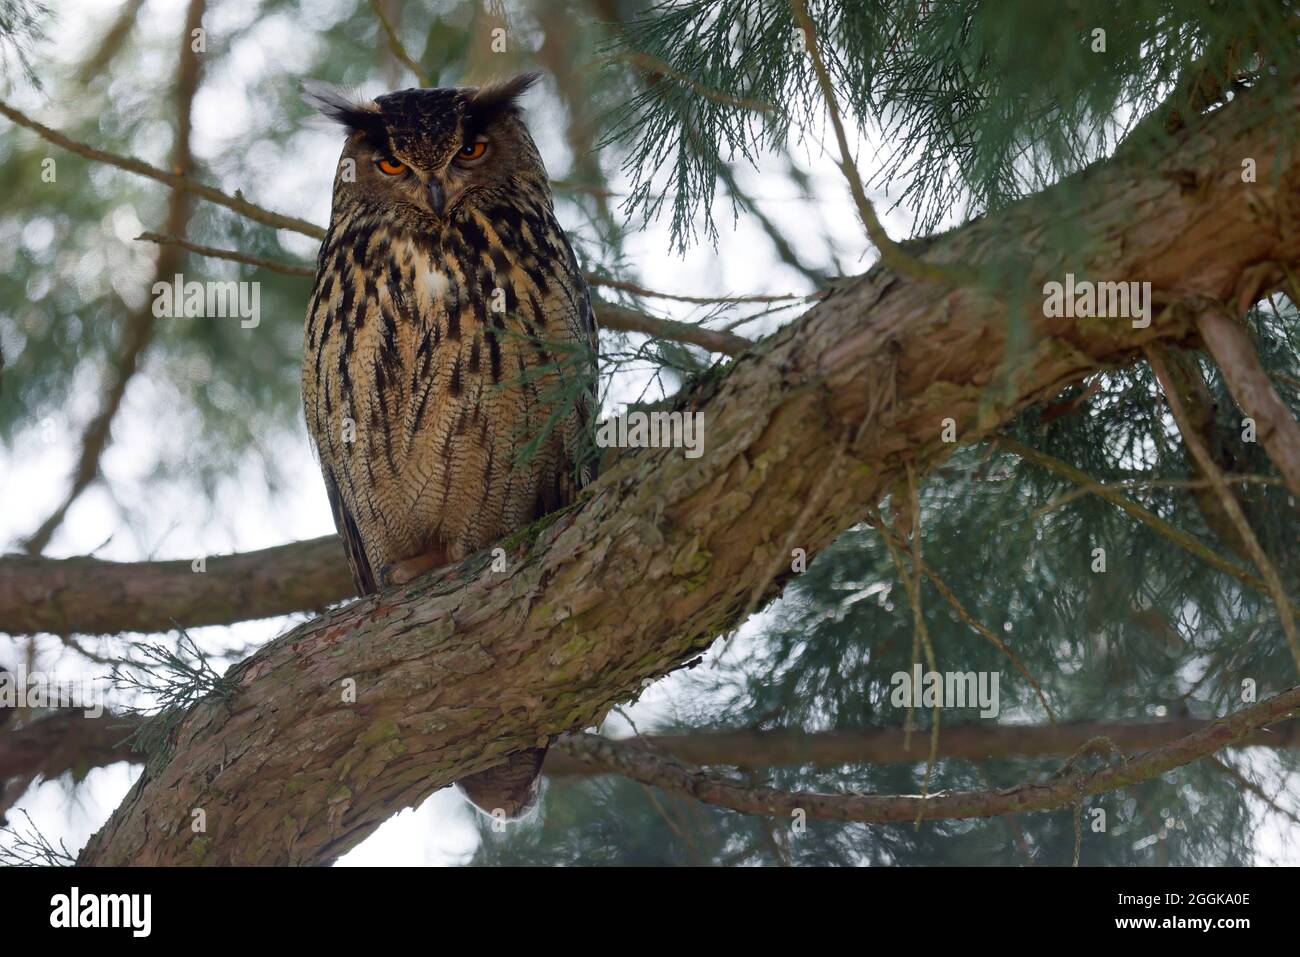 Eagle owl (Bubo bubo) sitting in a tree, wildlife, Black Forest, Baden-Württemberg, Germany, Stock Photo